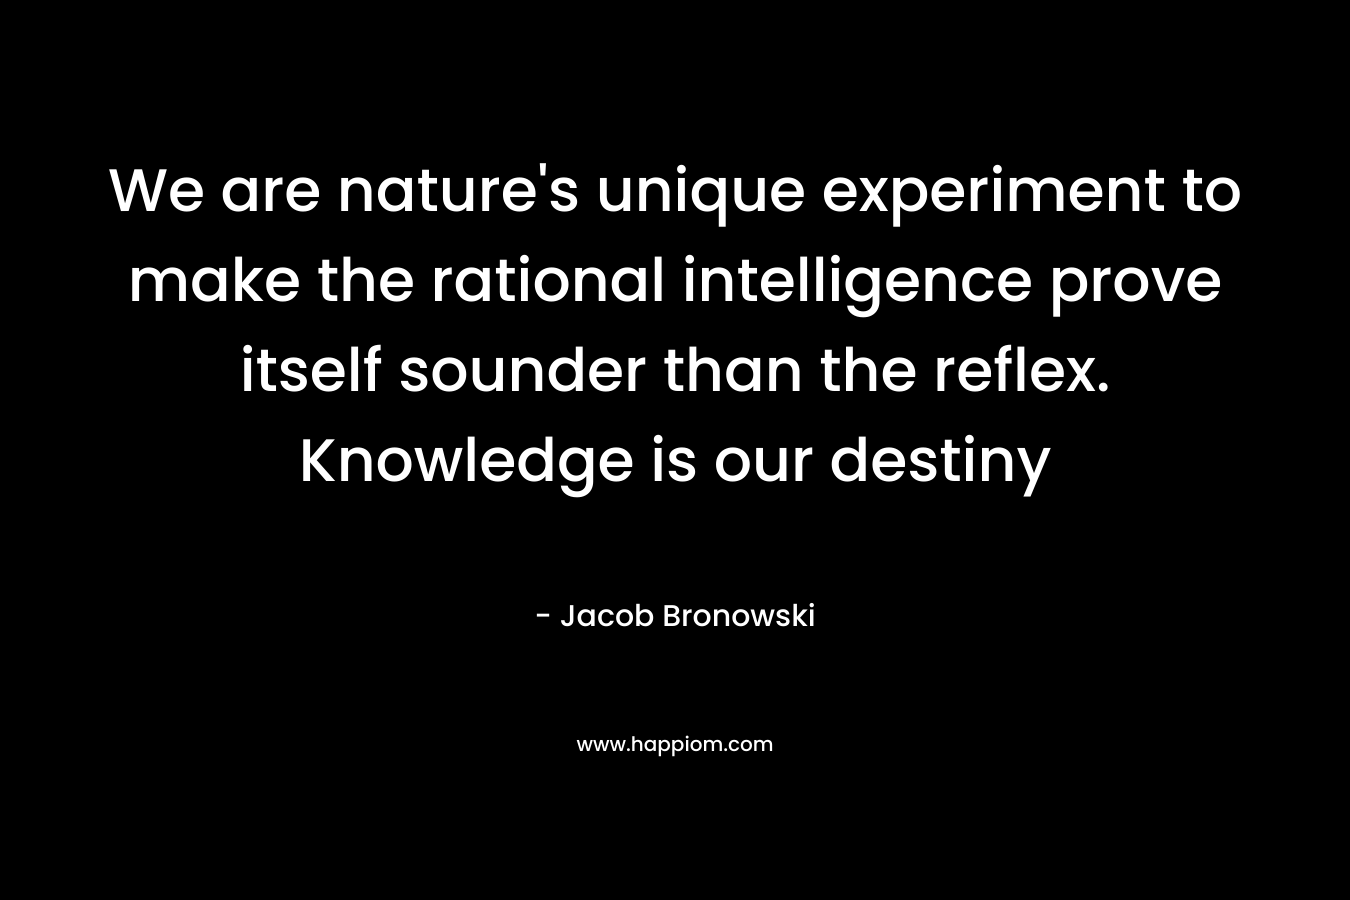 We are nature’s unique experiment to make the rational intelligence prove itself sounder than the reflex. Knowledge is our destiny – Jacob Bronowski